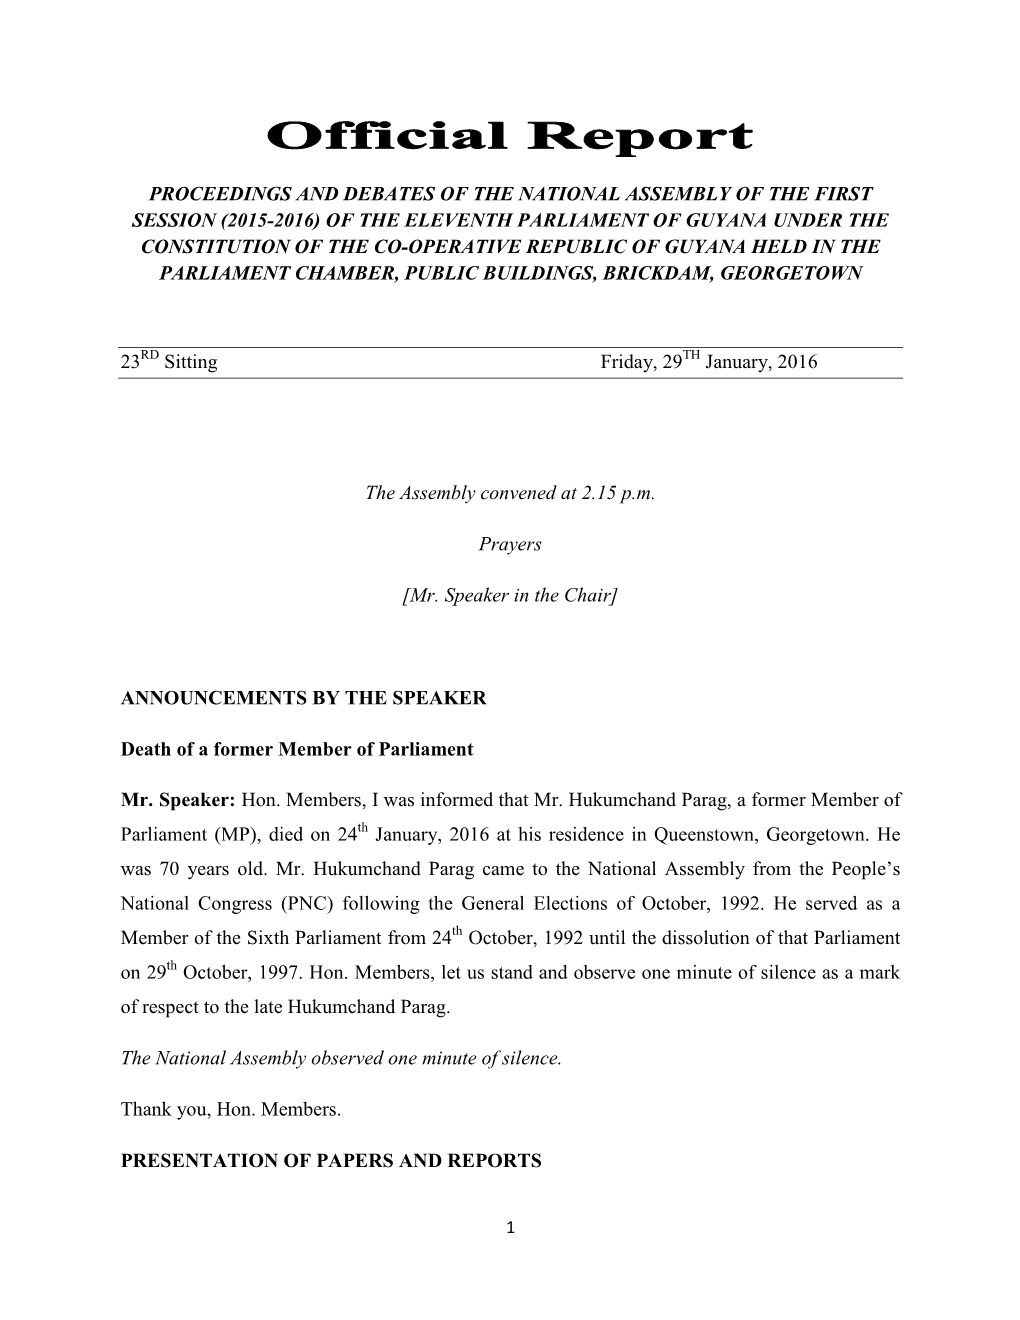 Proceedings and Debates of the National Assembly of the First Session (2015-2016) of the Eleventh Parliament of Guyana Under